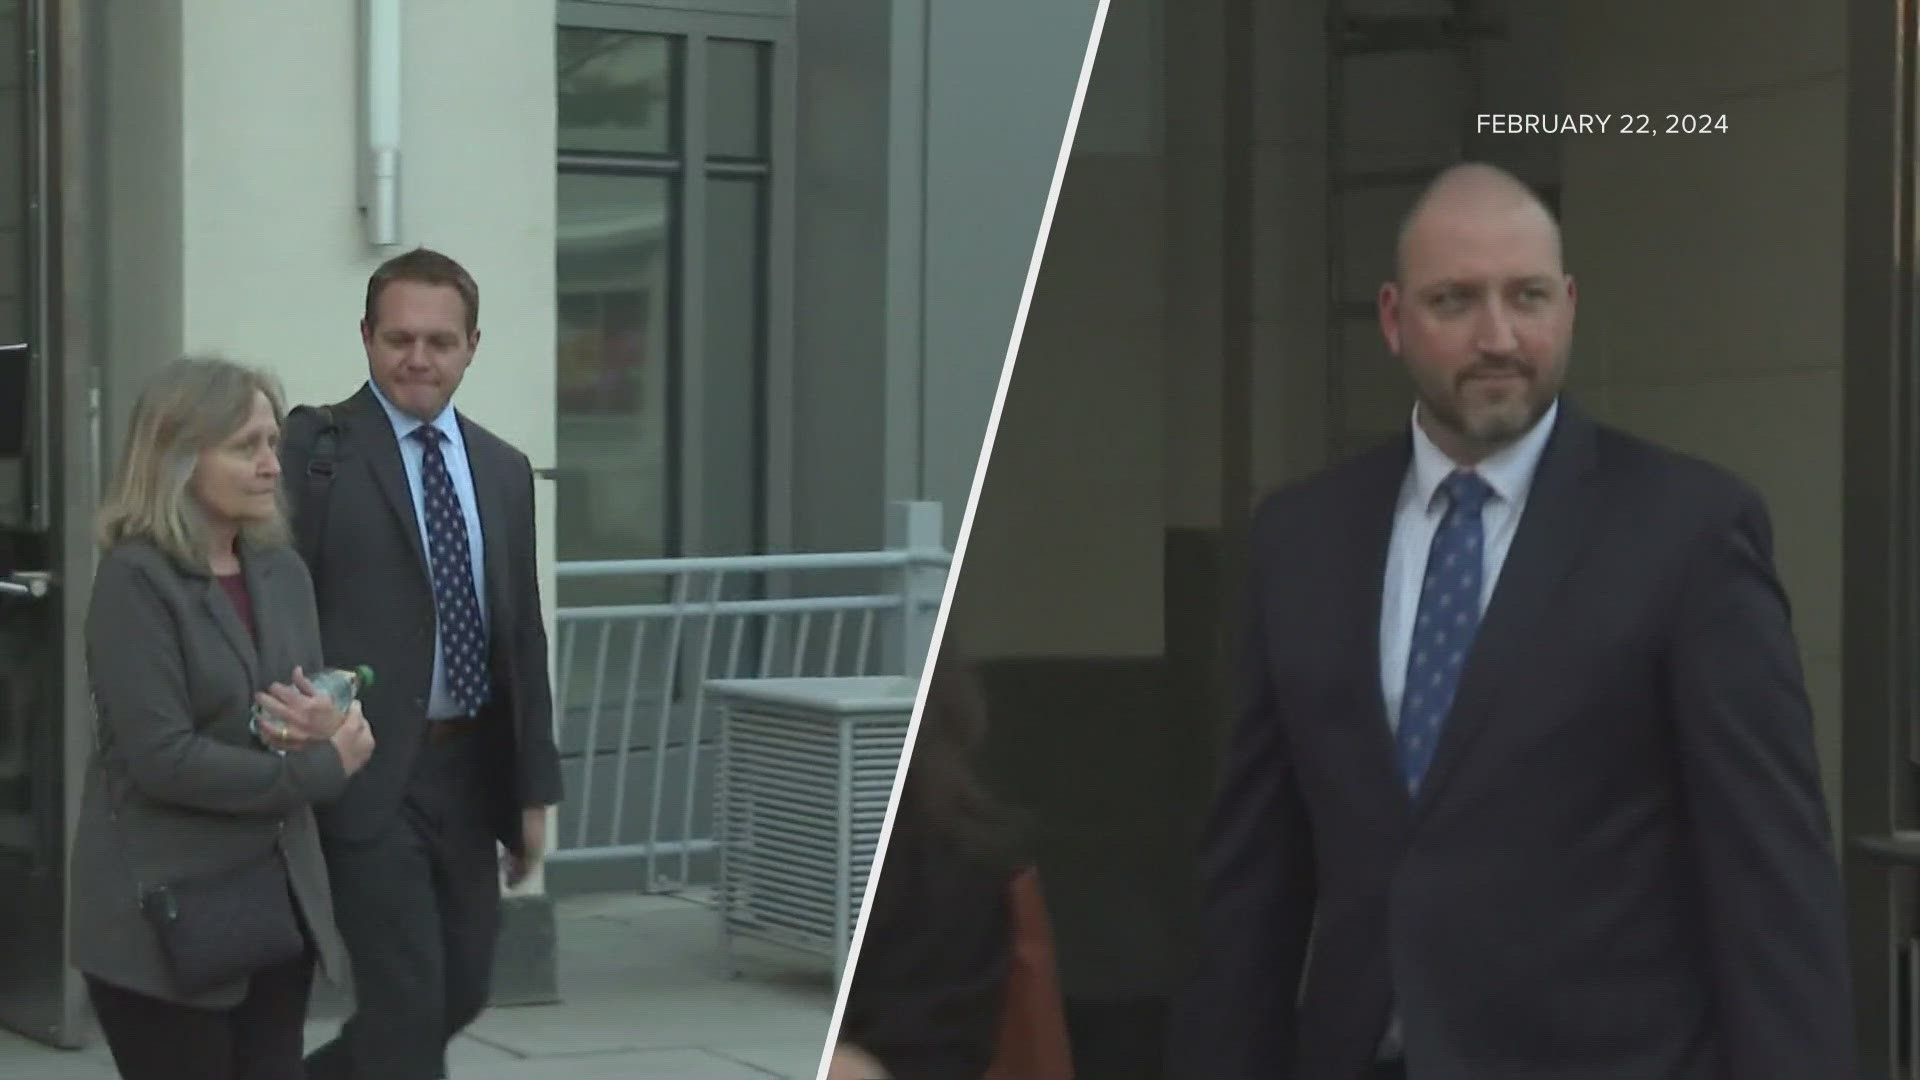 Prosecutors began crafting the foundation for their argument that Aaron Zahn and Ryan Wannemacher shut out advisors from the planning process and worked in secret.